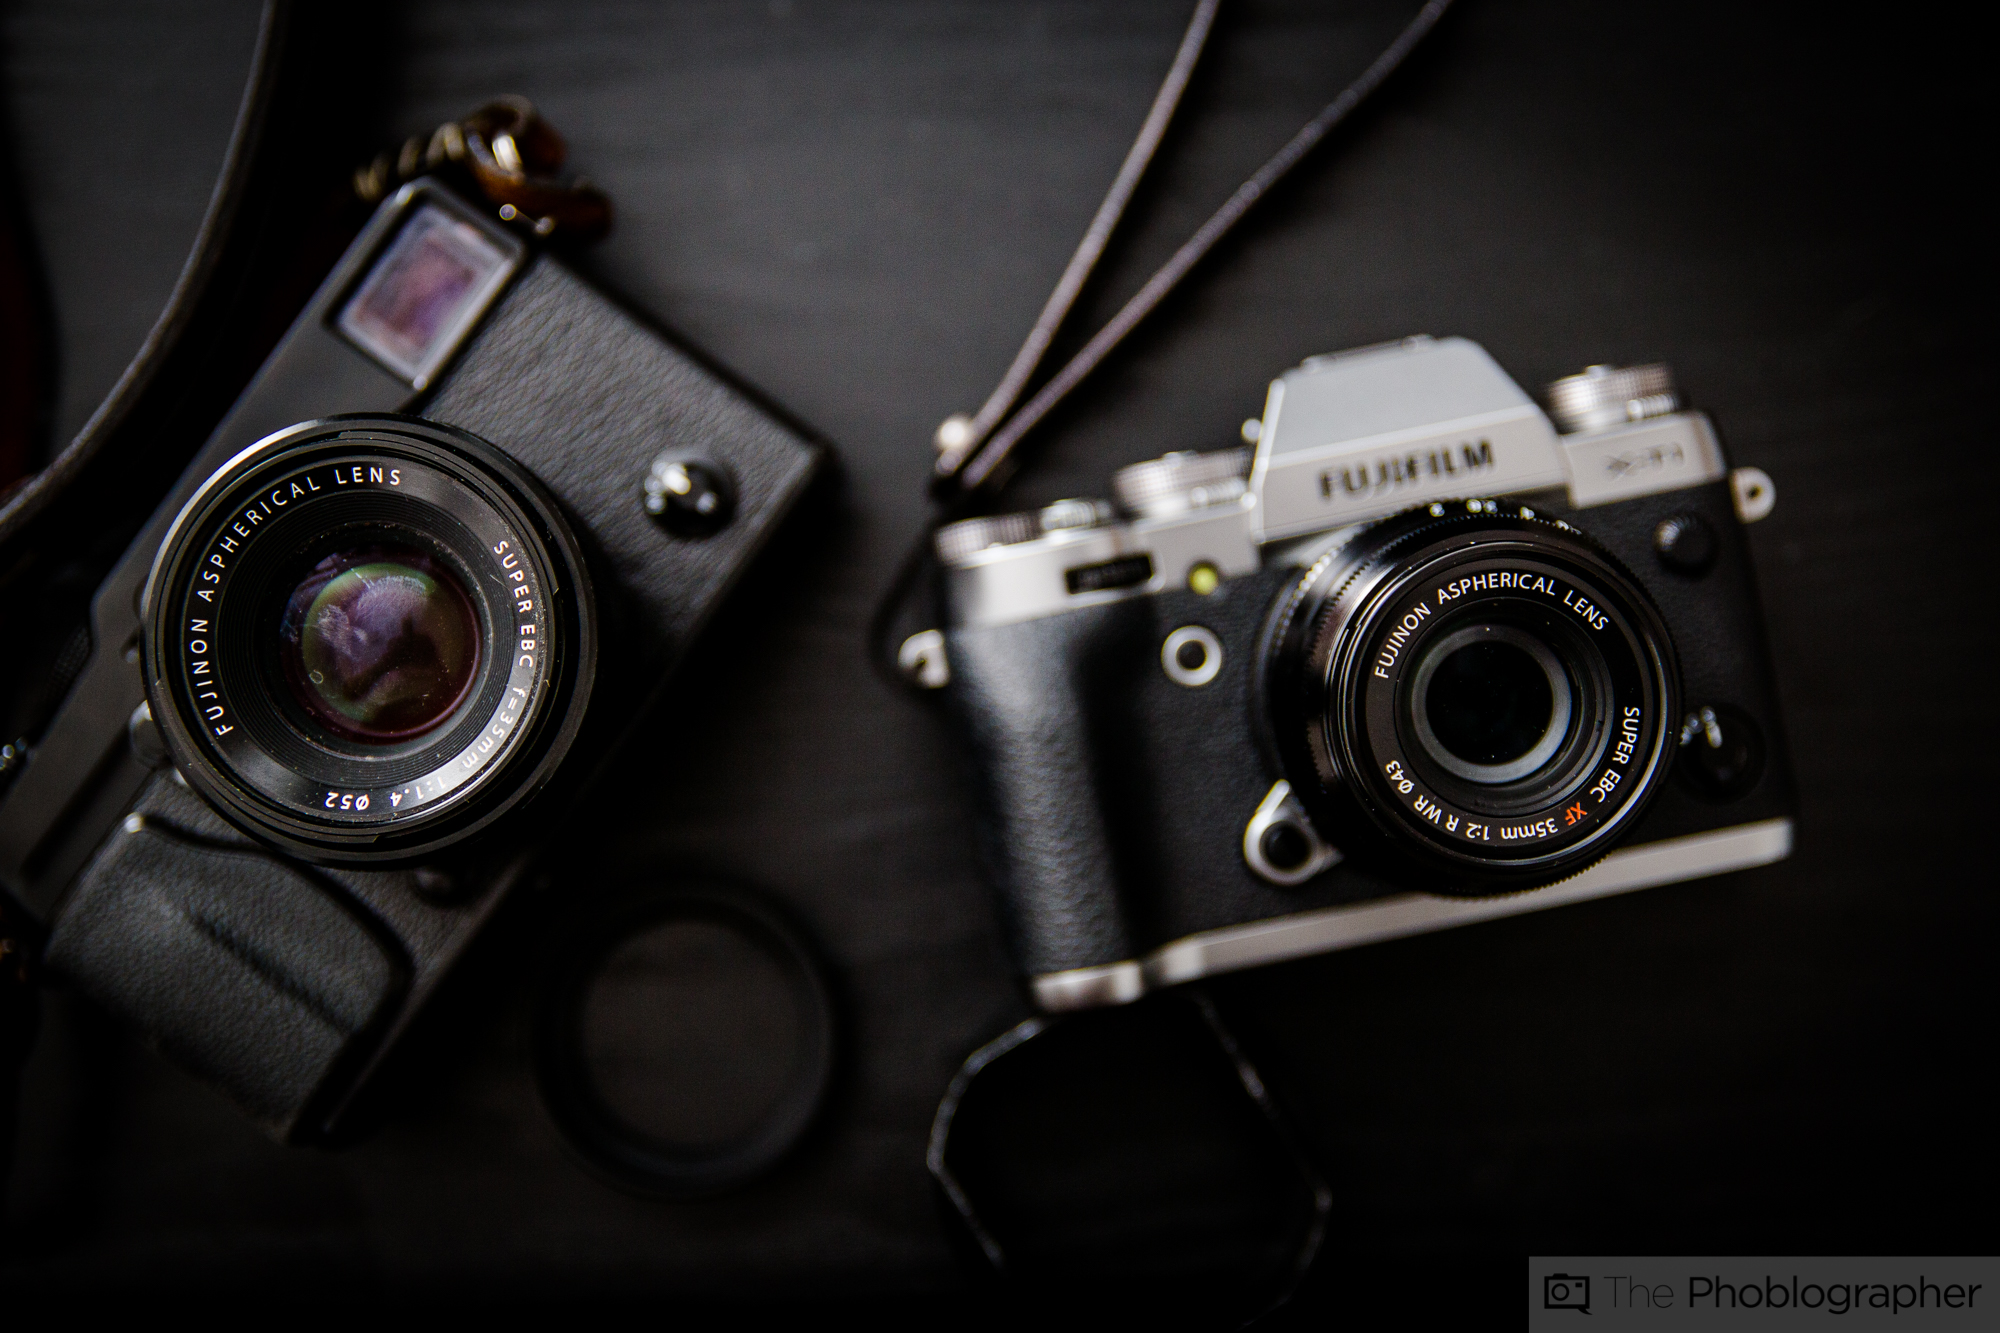 Photography Gear: September Has Been A Big Month For Sony, Fujifilm